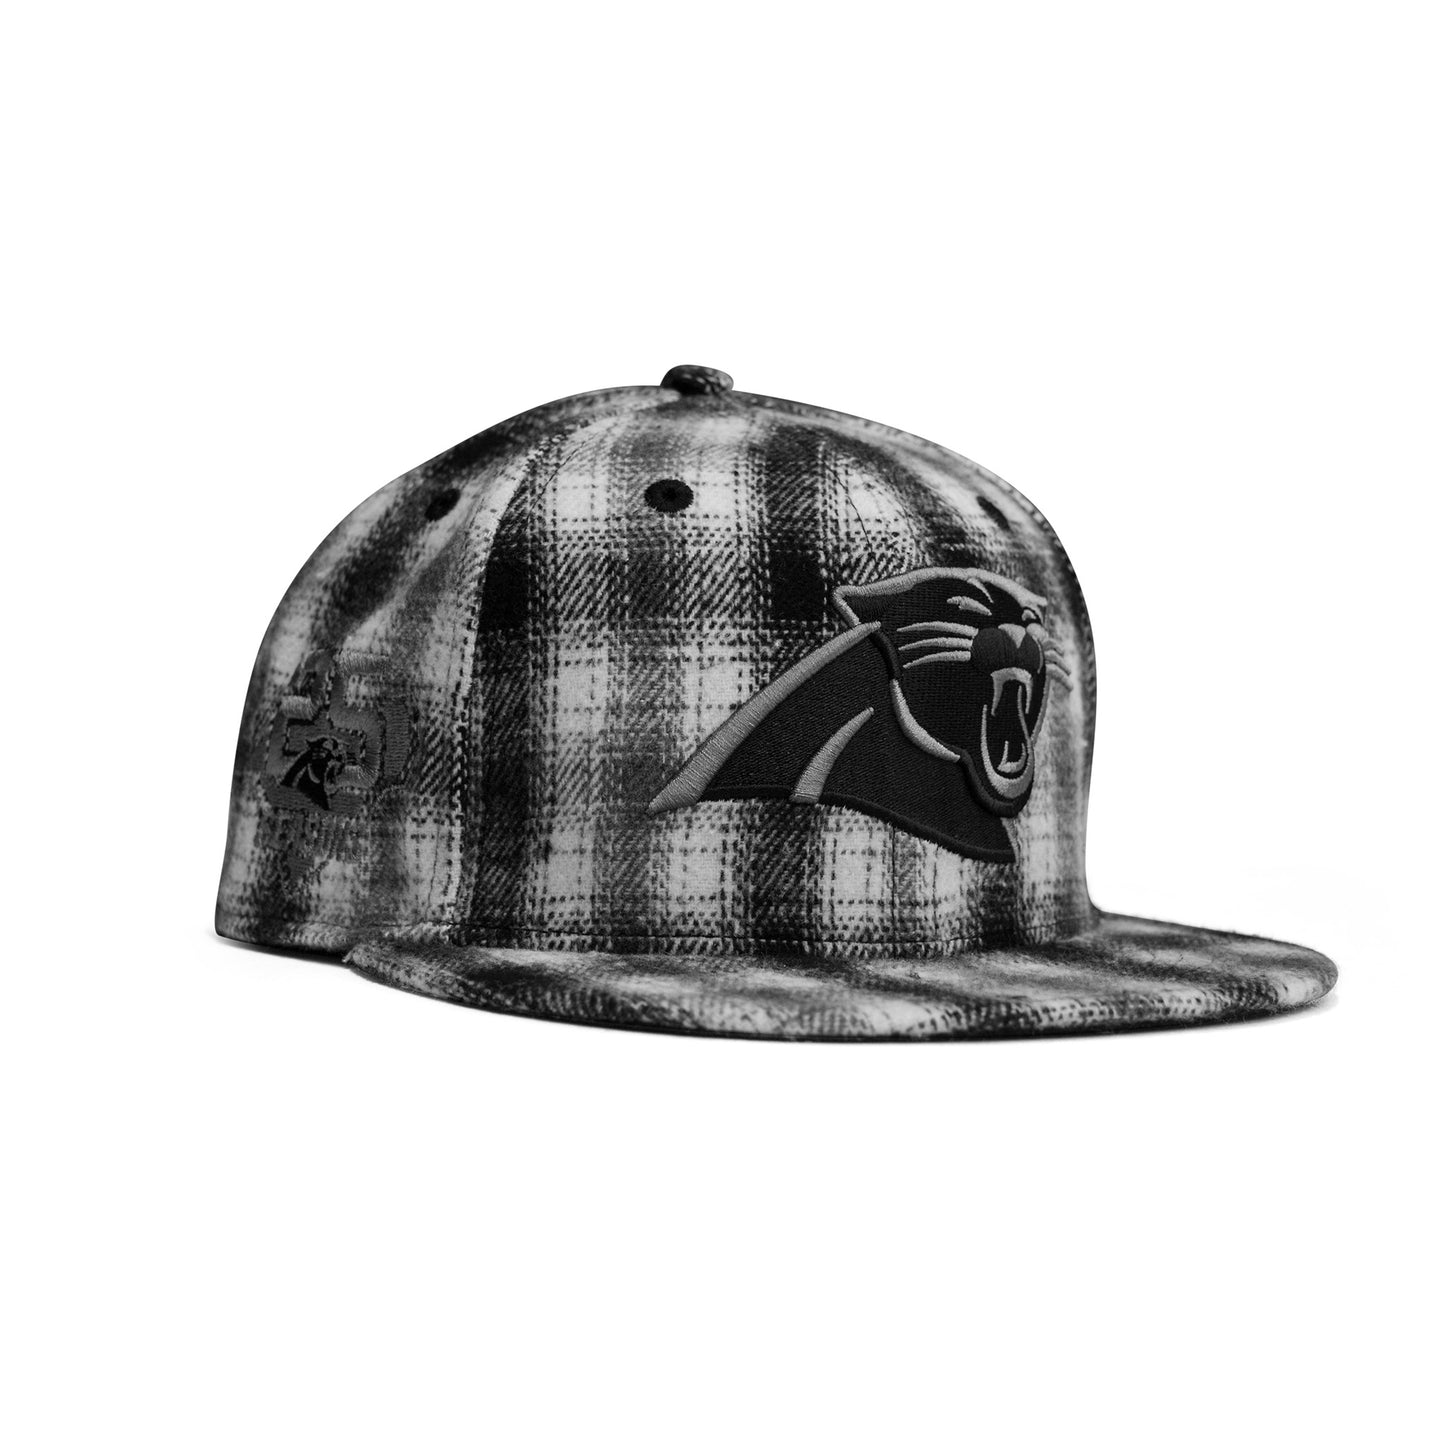 Limited Edition New Era x Carolina Panthers 5950 Fitted Hat - Black/Storm Gray/Multi